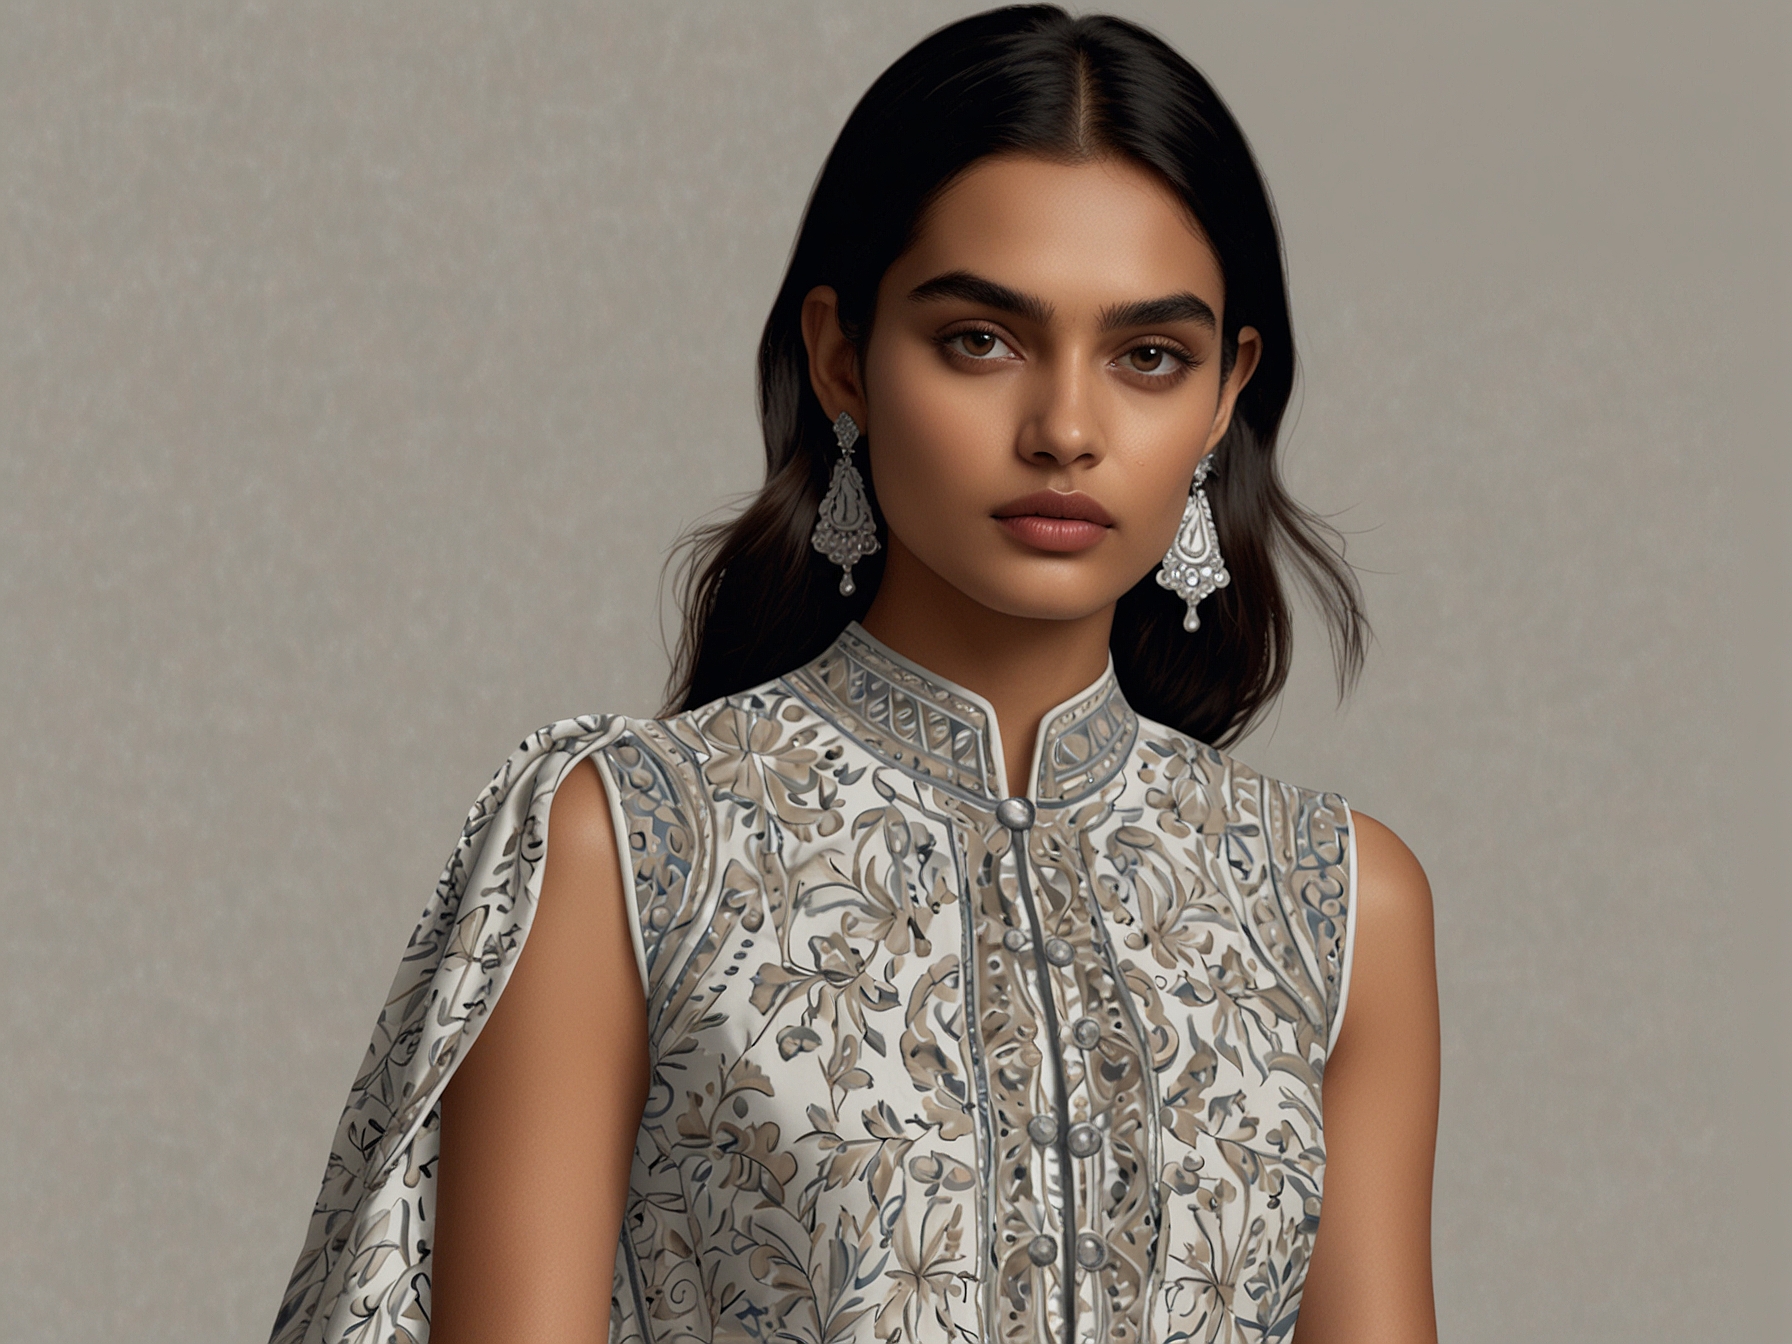 A model showcases the intricate detailing and sophisticated embroidery of Rahul Mishra's 'Aura' collection, blending traditional Indian motifs with contemporary fashion.